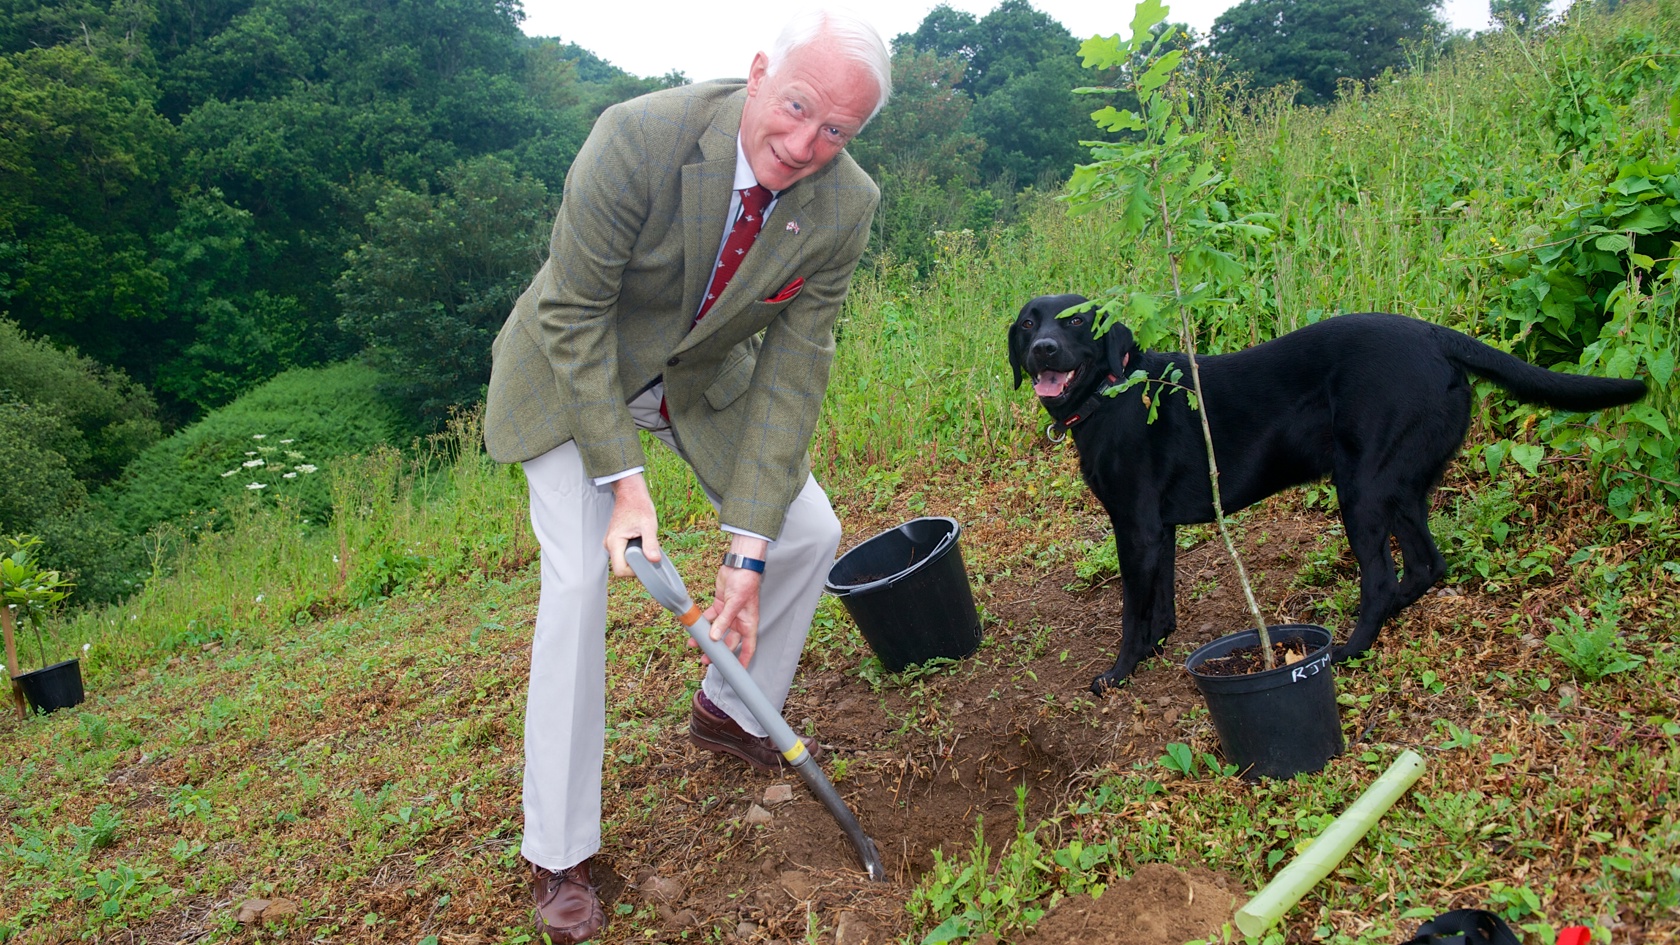 His Excellency preparing a hole to plant a tree at a new site on Bouley Bay Hill as part of the nationwide initiative, The Queen’s Green Canopy project.